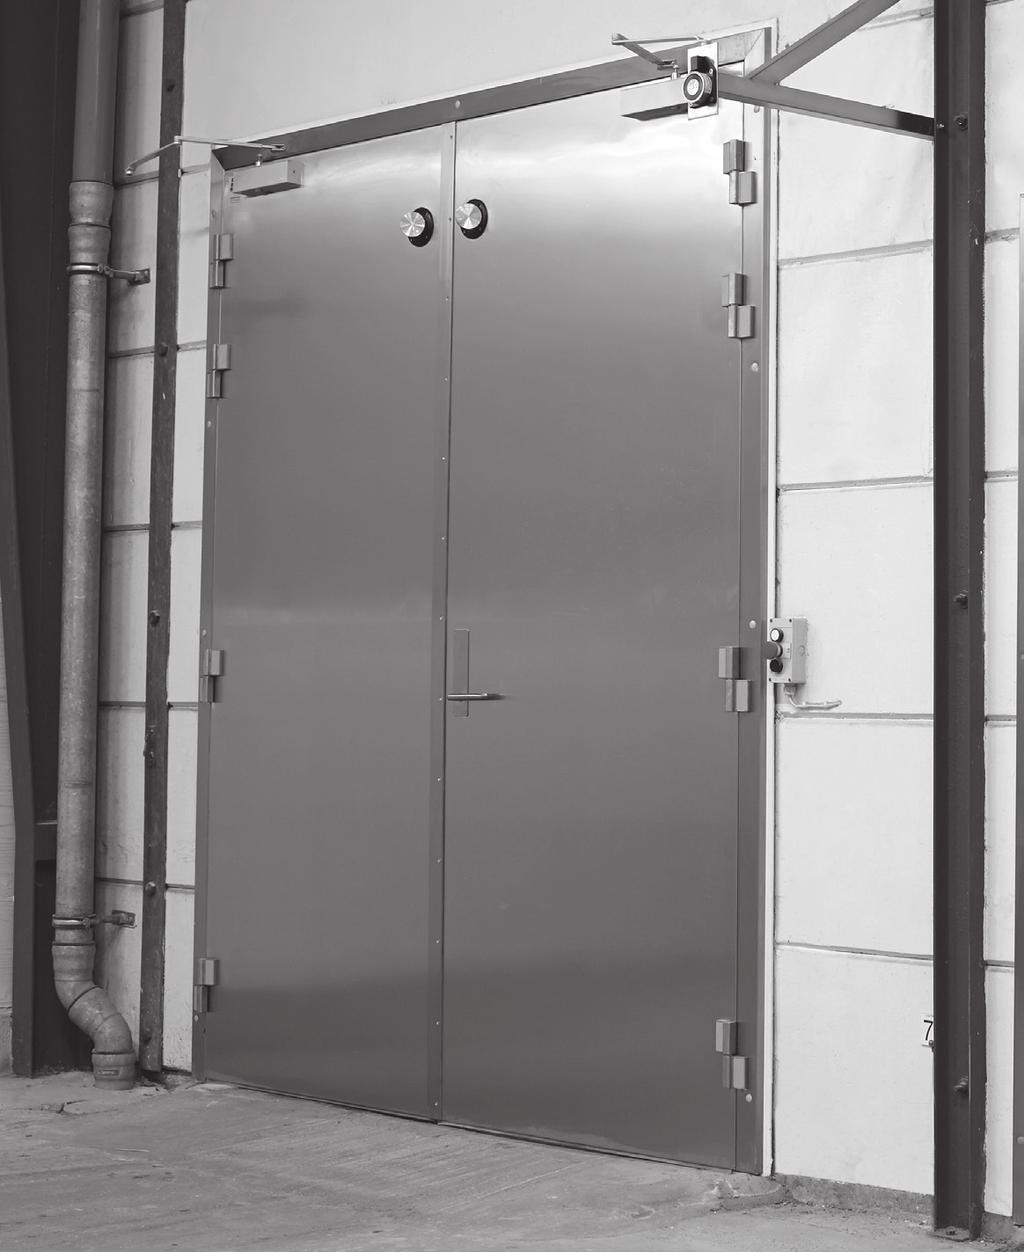 Hinged Doors - Cold Rooms, 100 mm TECHNICAL SPECIFICATIONS: INSULATION PIR/PUR foam. DOOR LEAF Plastisol-coated or stainless steel. FRAME 1.5 mm polished stainless steel or 2.